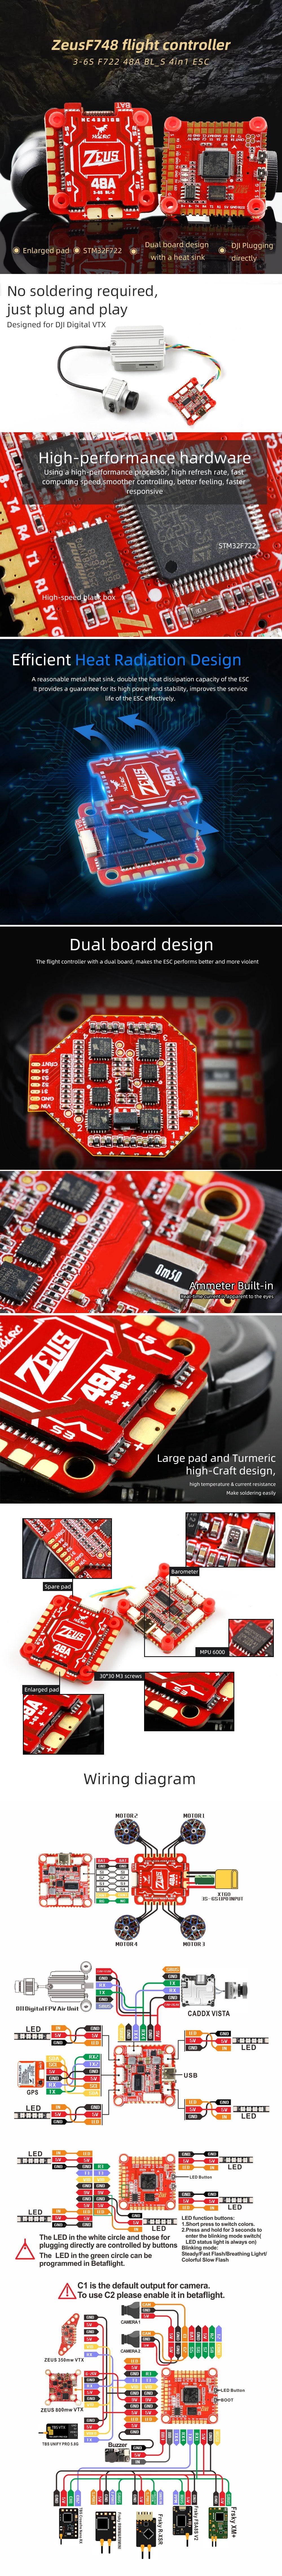 HGLRC Zeus F748 Stack - F722 Flight Controller and 48A BL_S ESC Features and Wiring Diagram